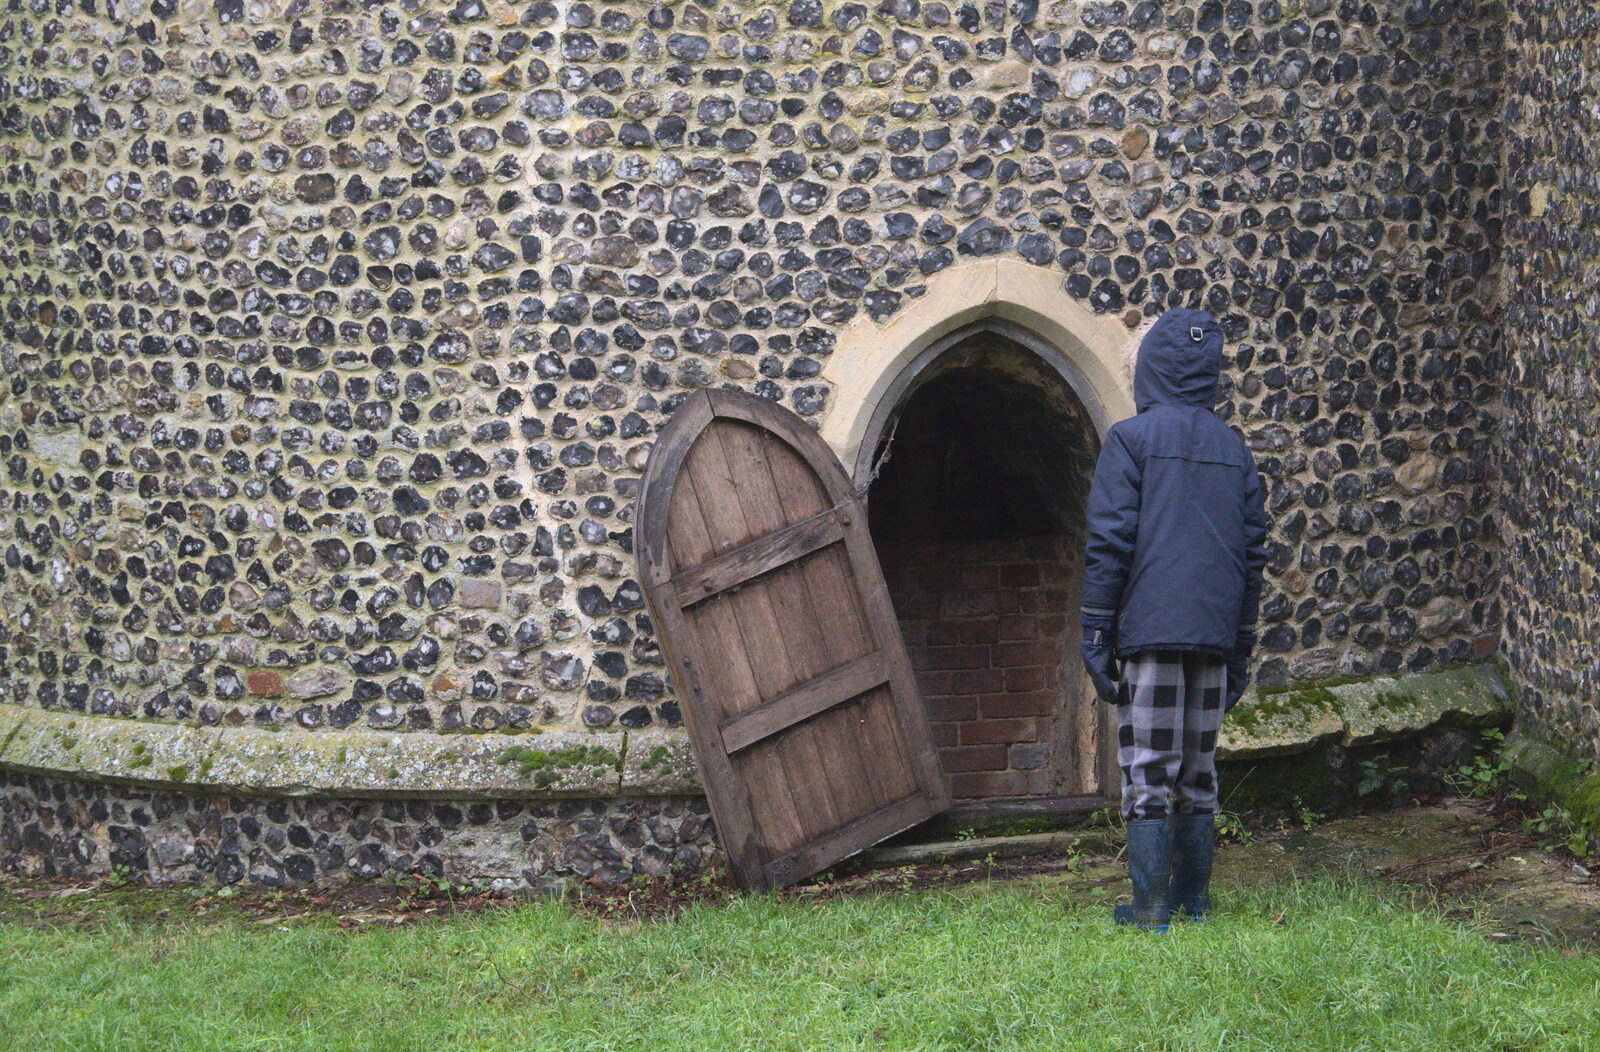 Harry peers in where the door has fallen off from Fun With Ice in Lockdown, Brome, Suffolk - 10th January 2021